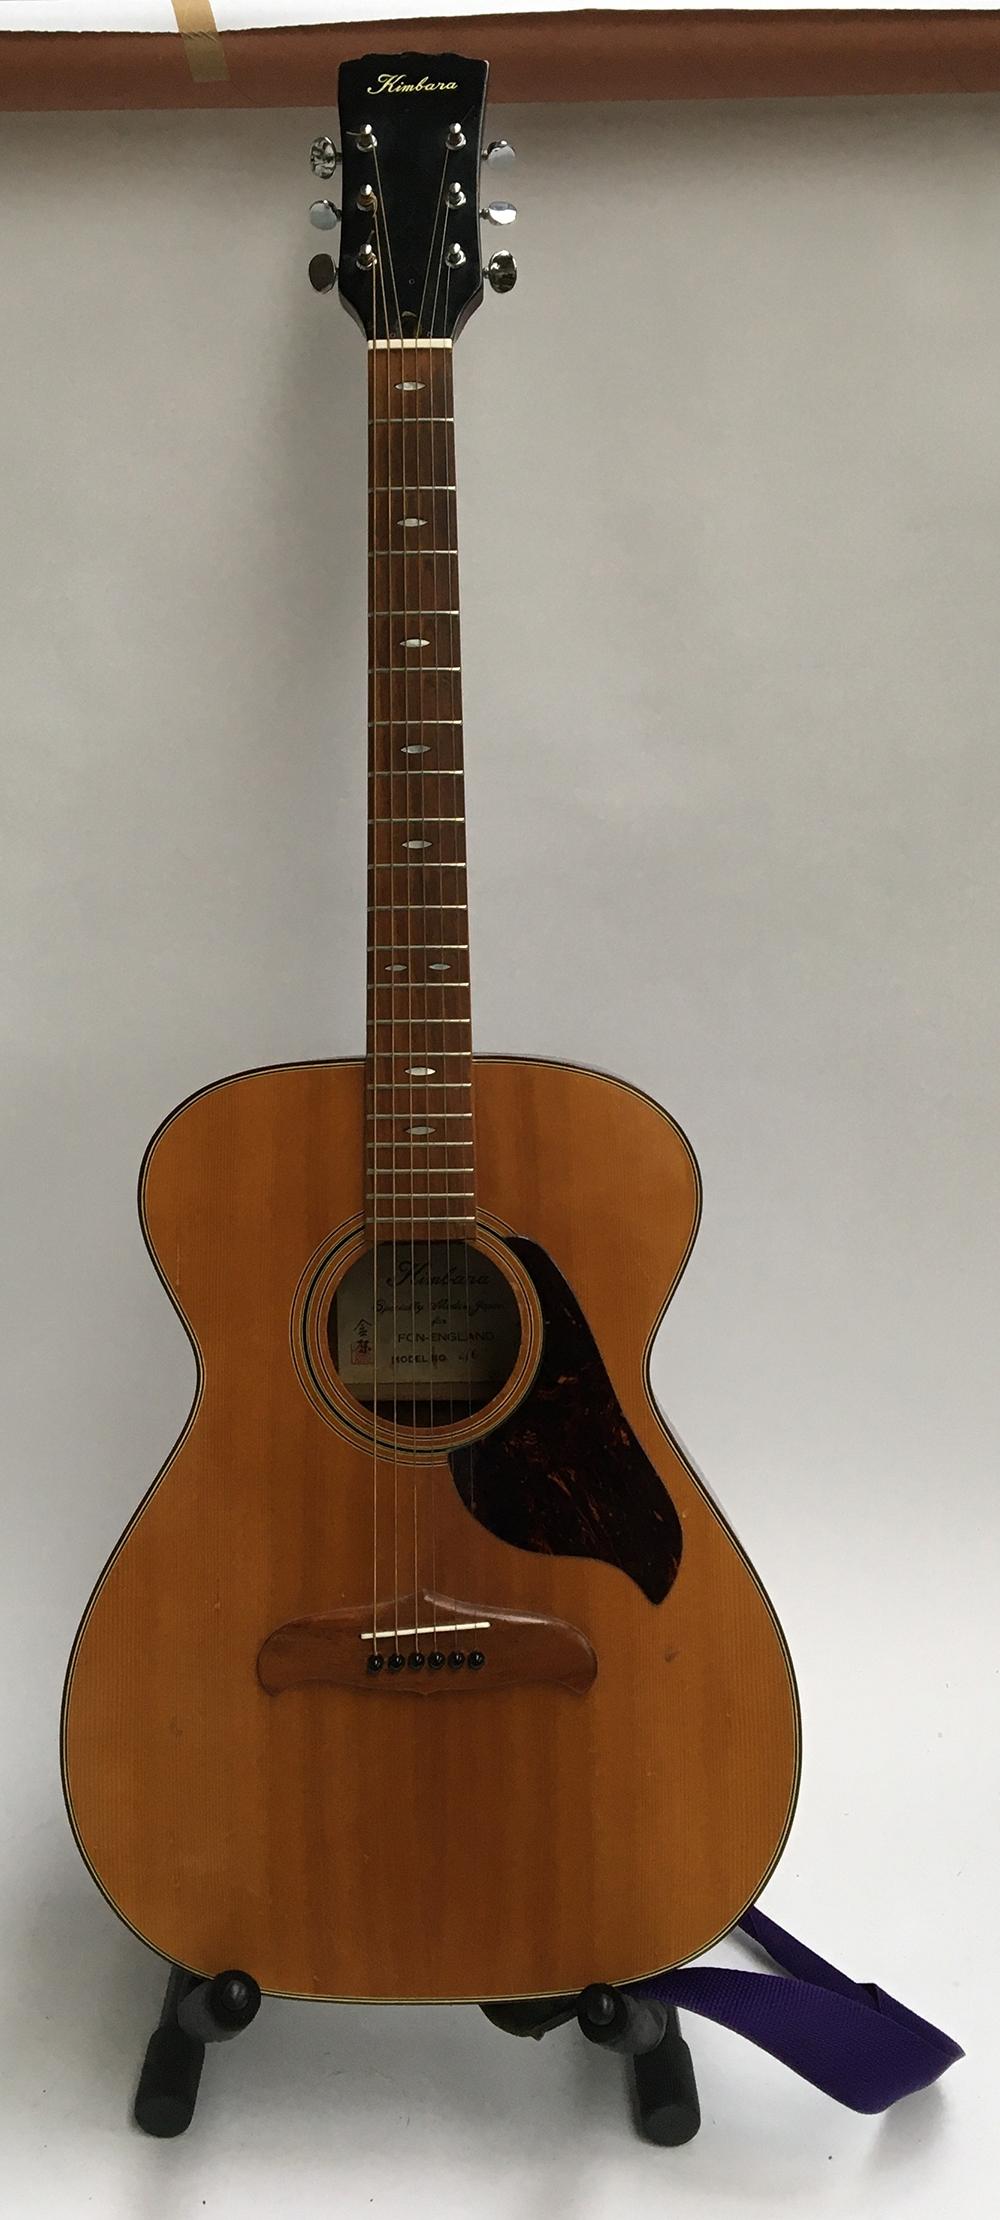 A Kimbara model 2/G acoustic guitar, made in Japan, FCN England, in soft case